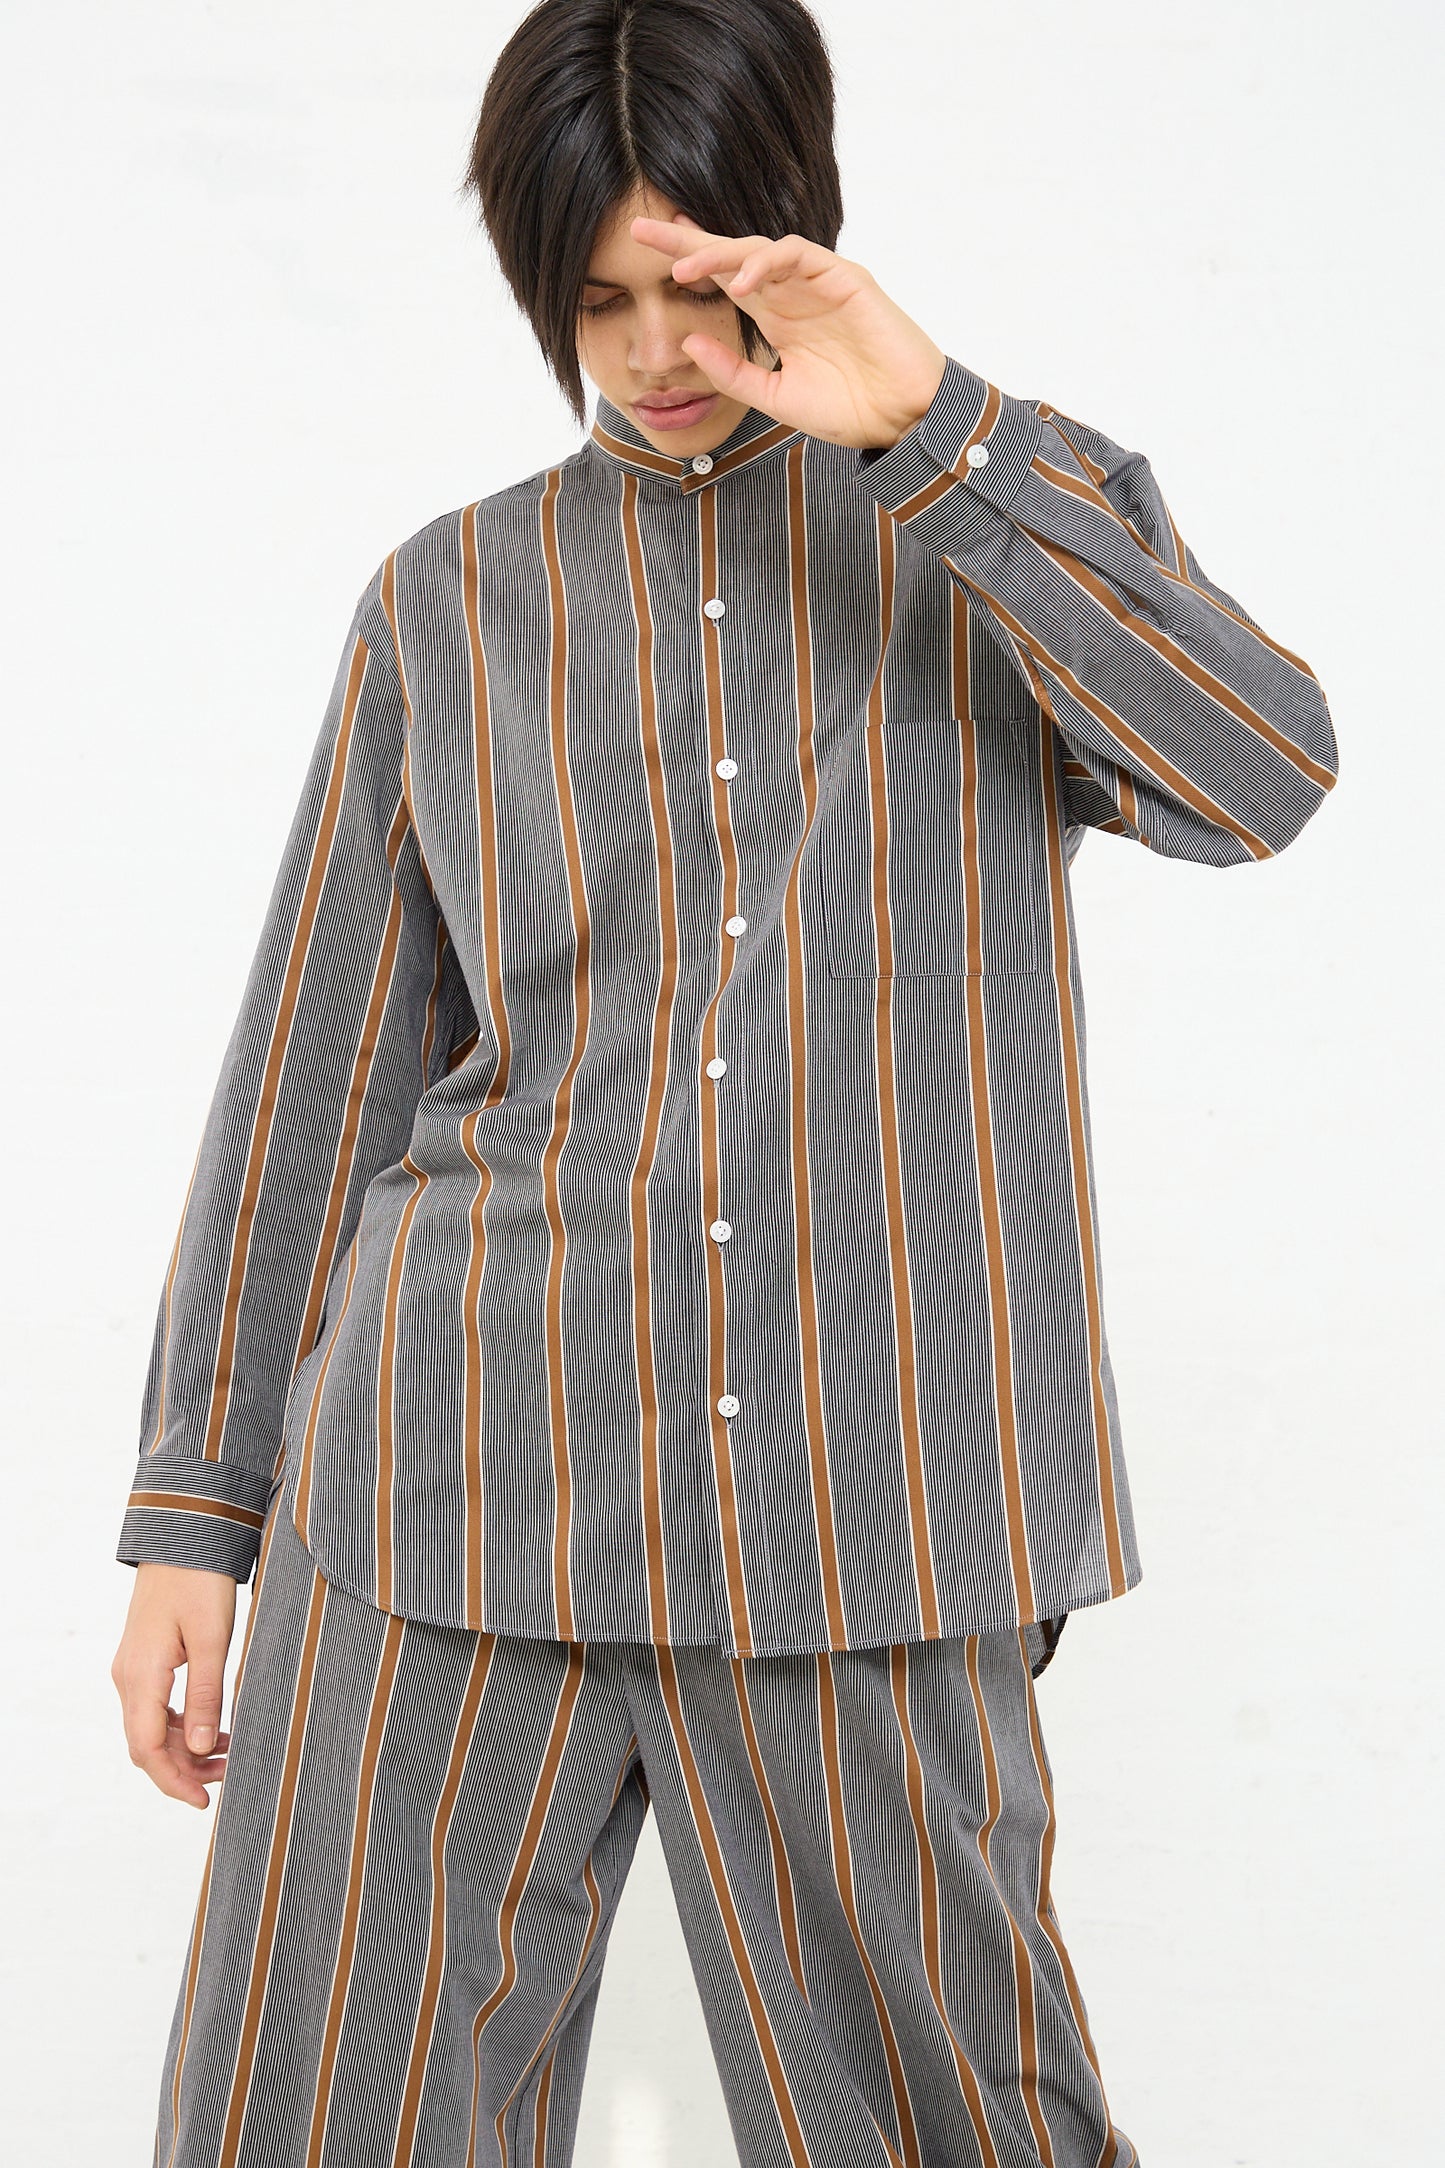 A man wearing a Cristaseya Mao Shirt with Fringed Collar in Striped Black and Noisette. Front view.